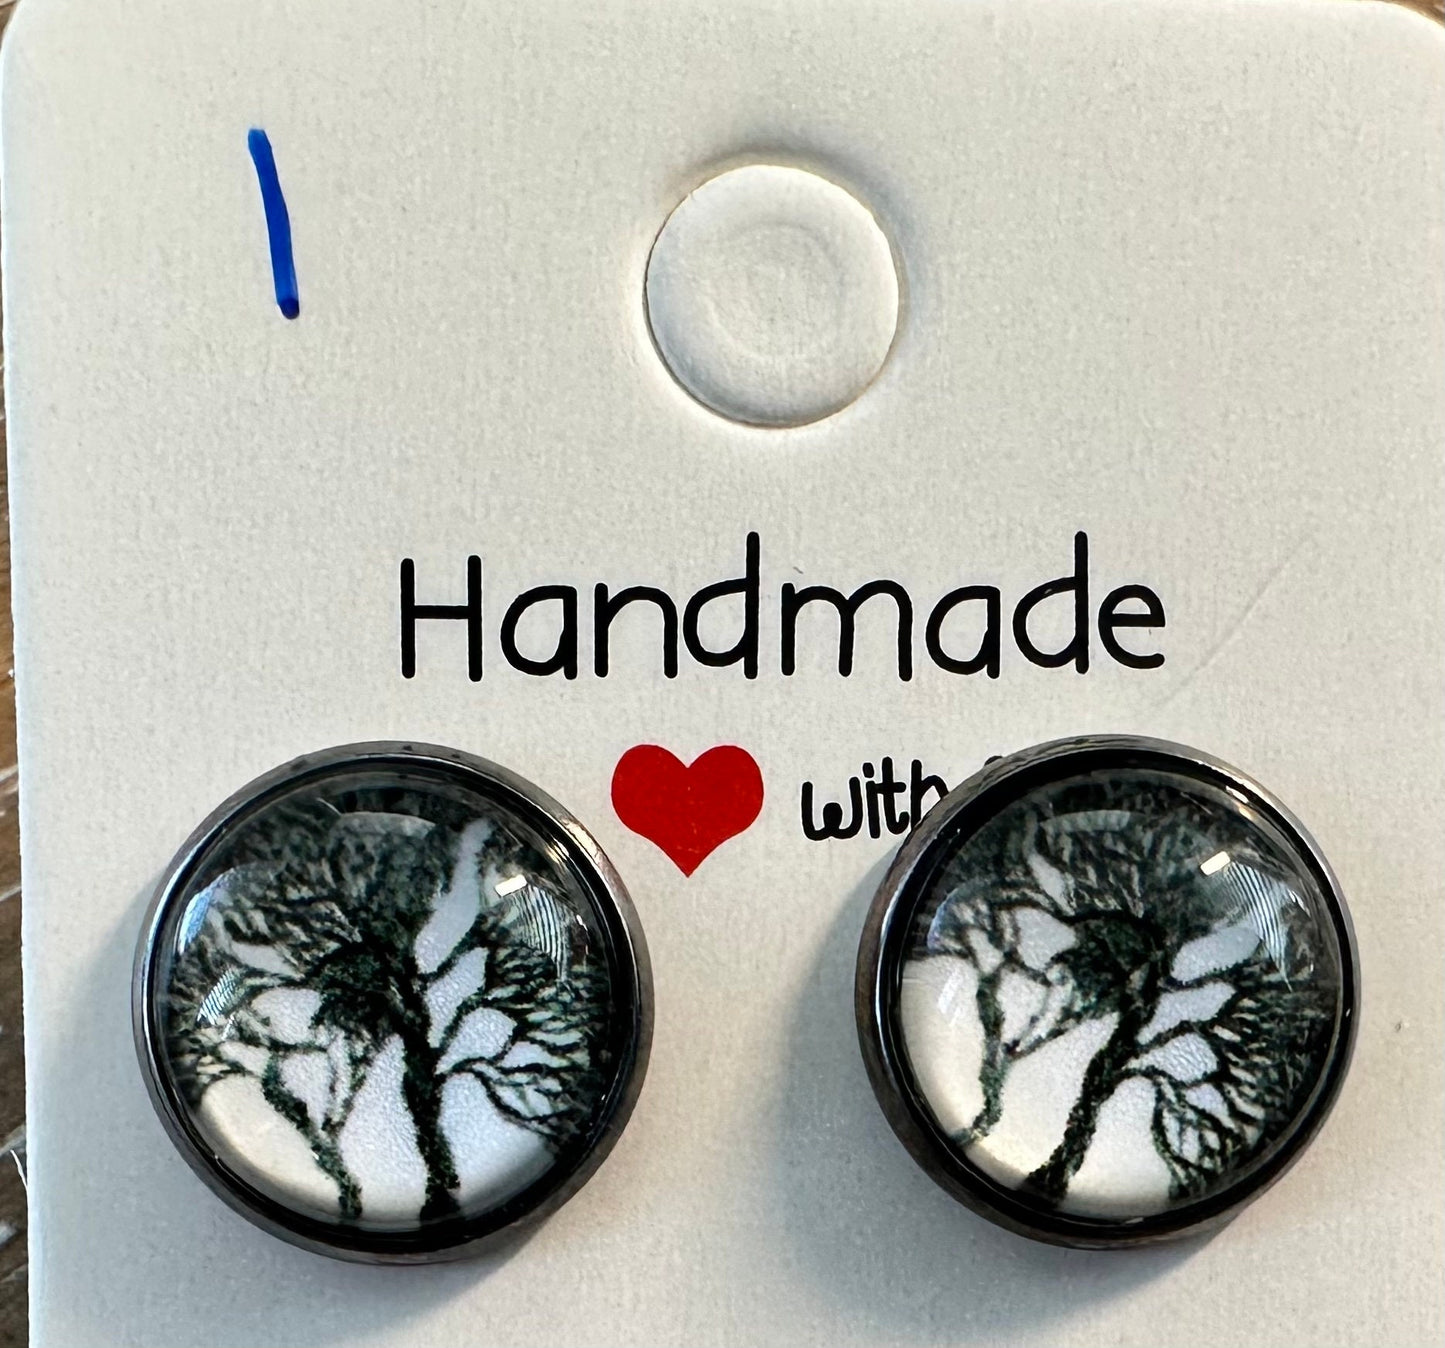 12M Black and White Tree Scene Stud earrings, great guy or girl gifts, unique, Silver stainless steel won't tarnish, hypoallergenic, unique